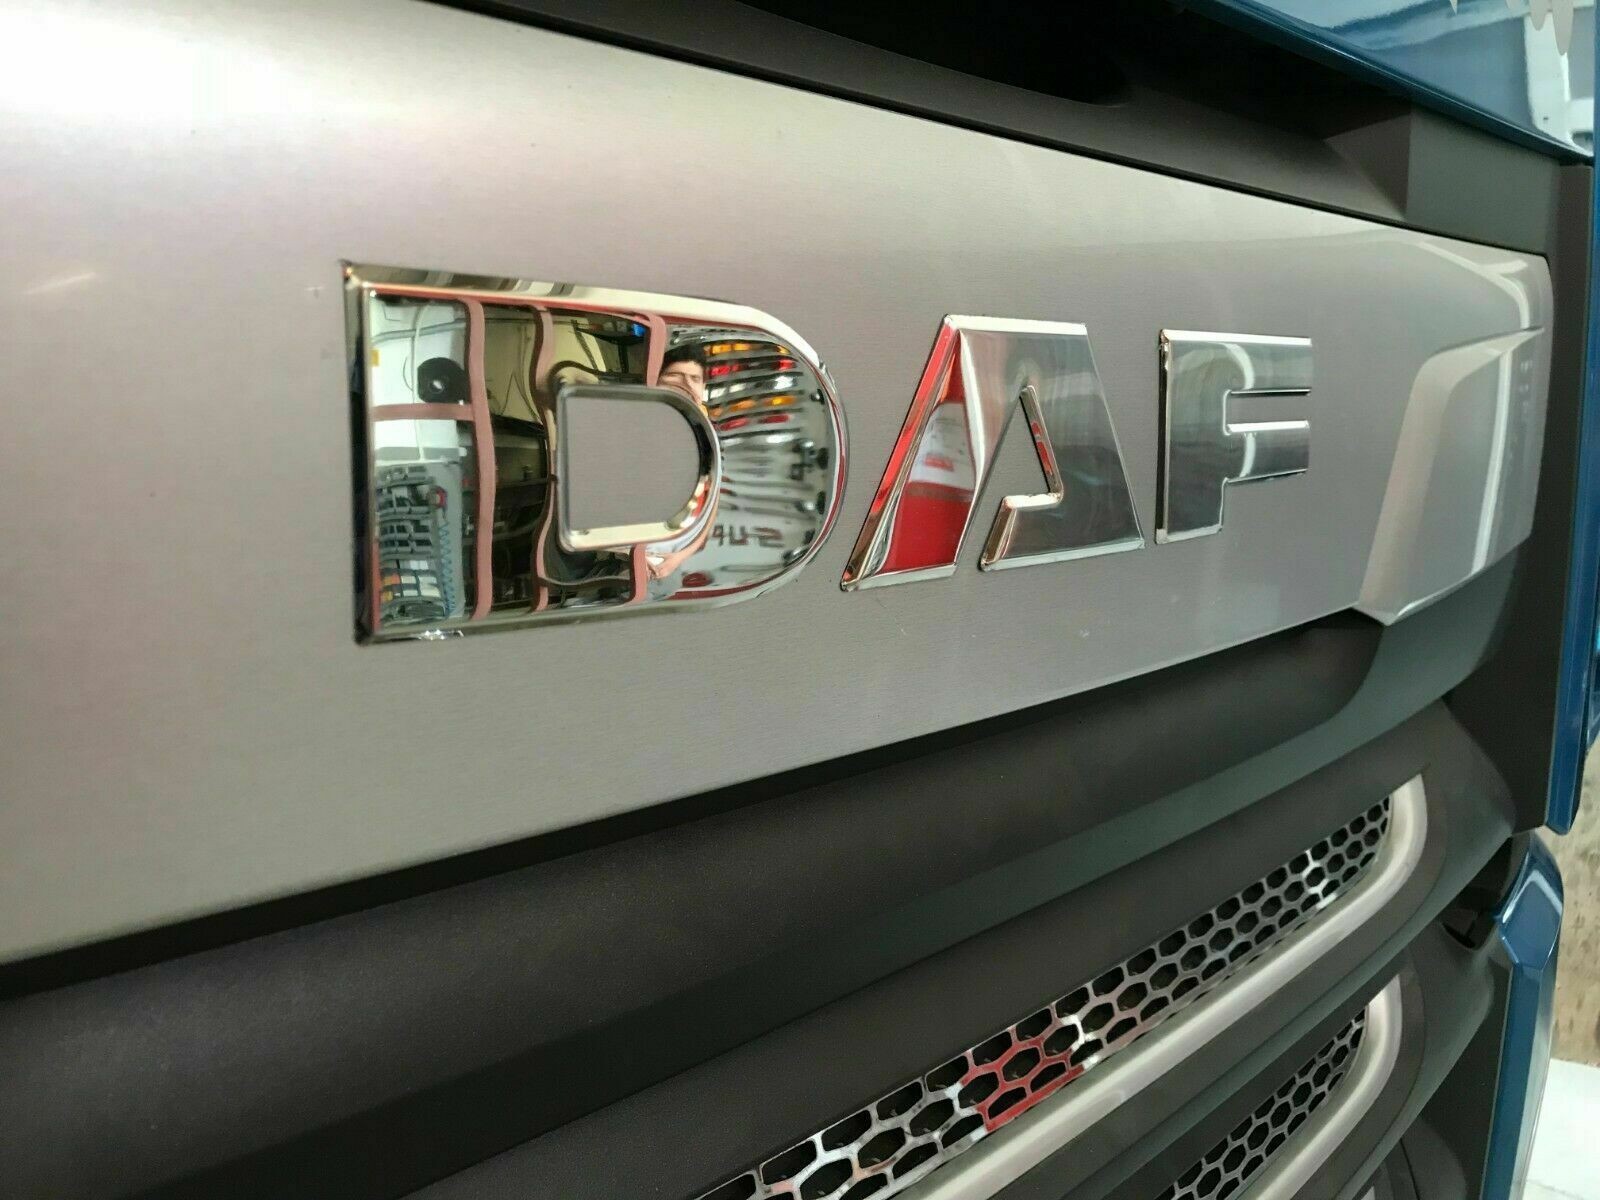 DAF XF 106 Truck Stainless Steel Name Logo Grill Badge 3 pcs S. STEEL